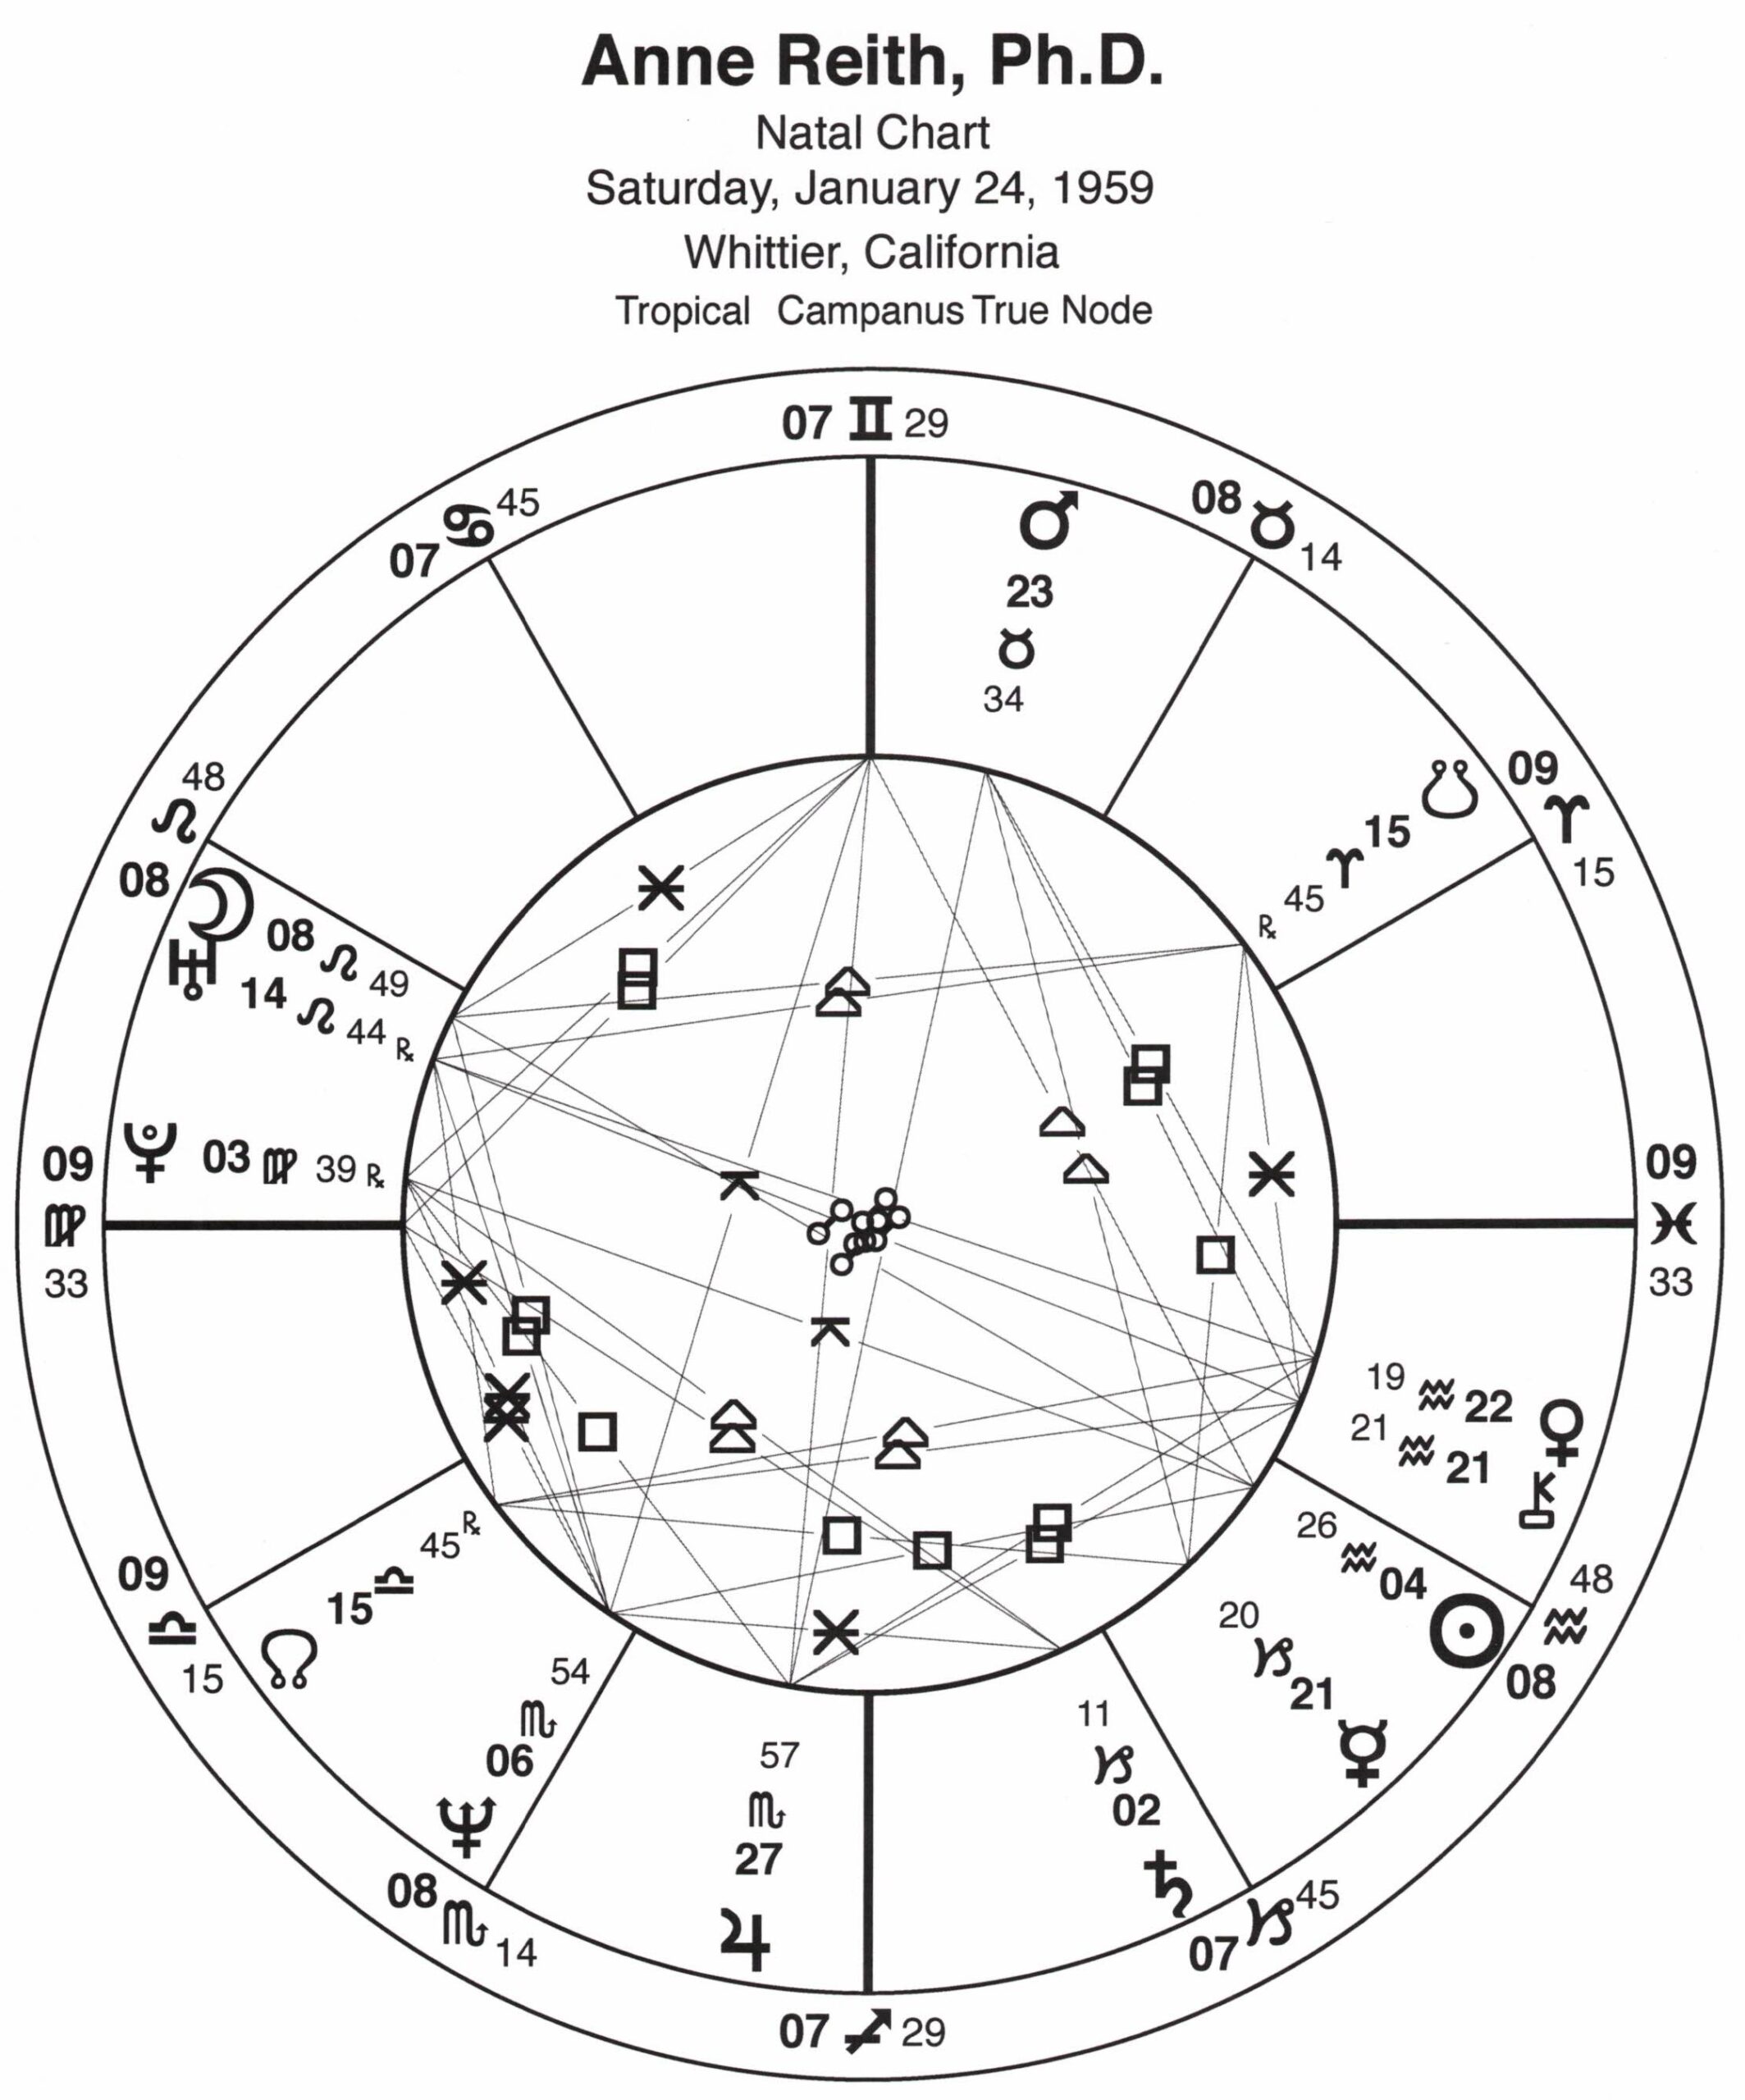 Anne's Natal Chart in black and white